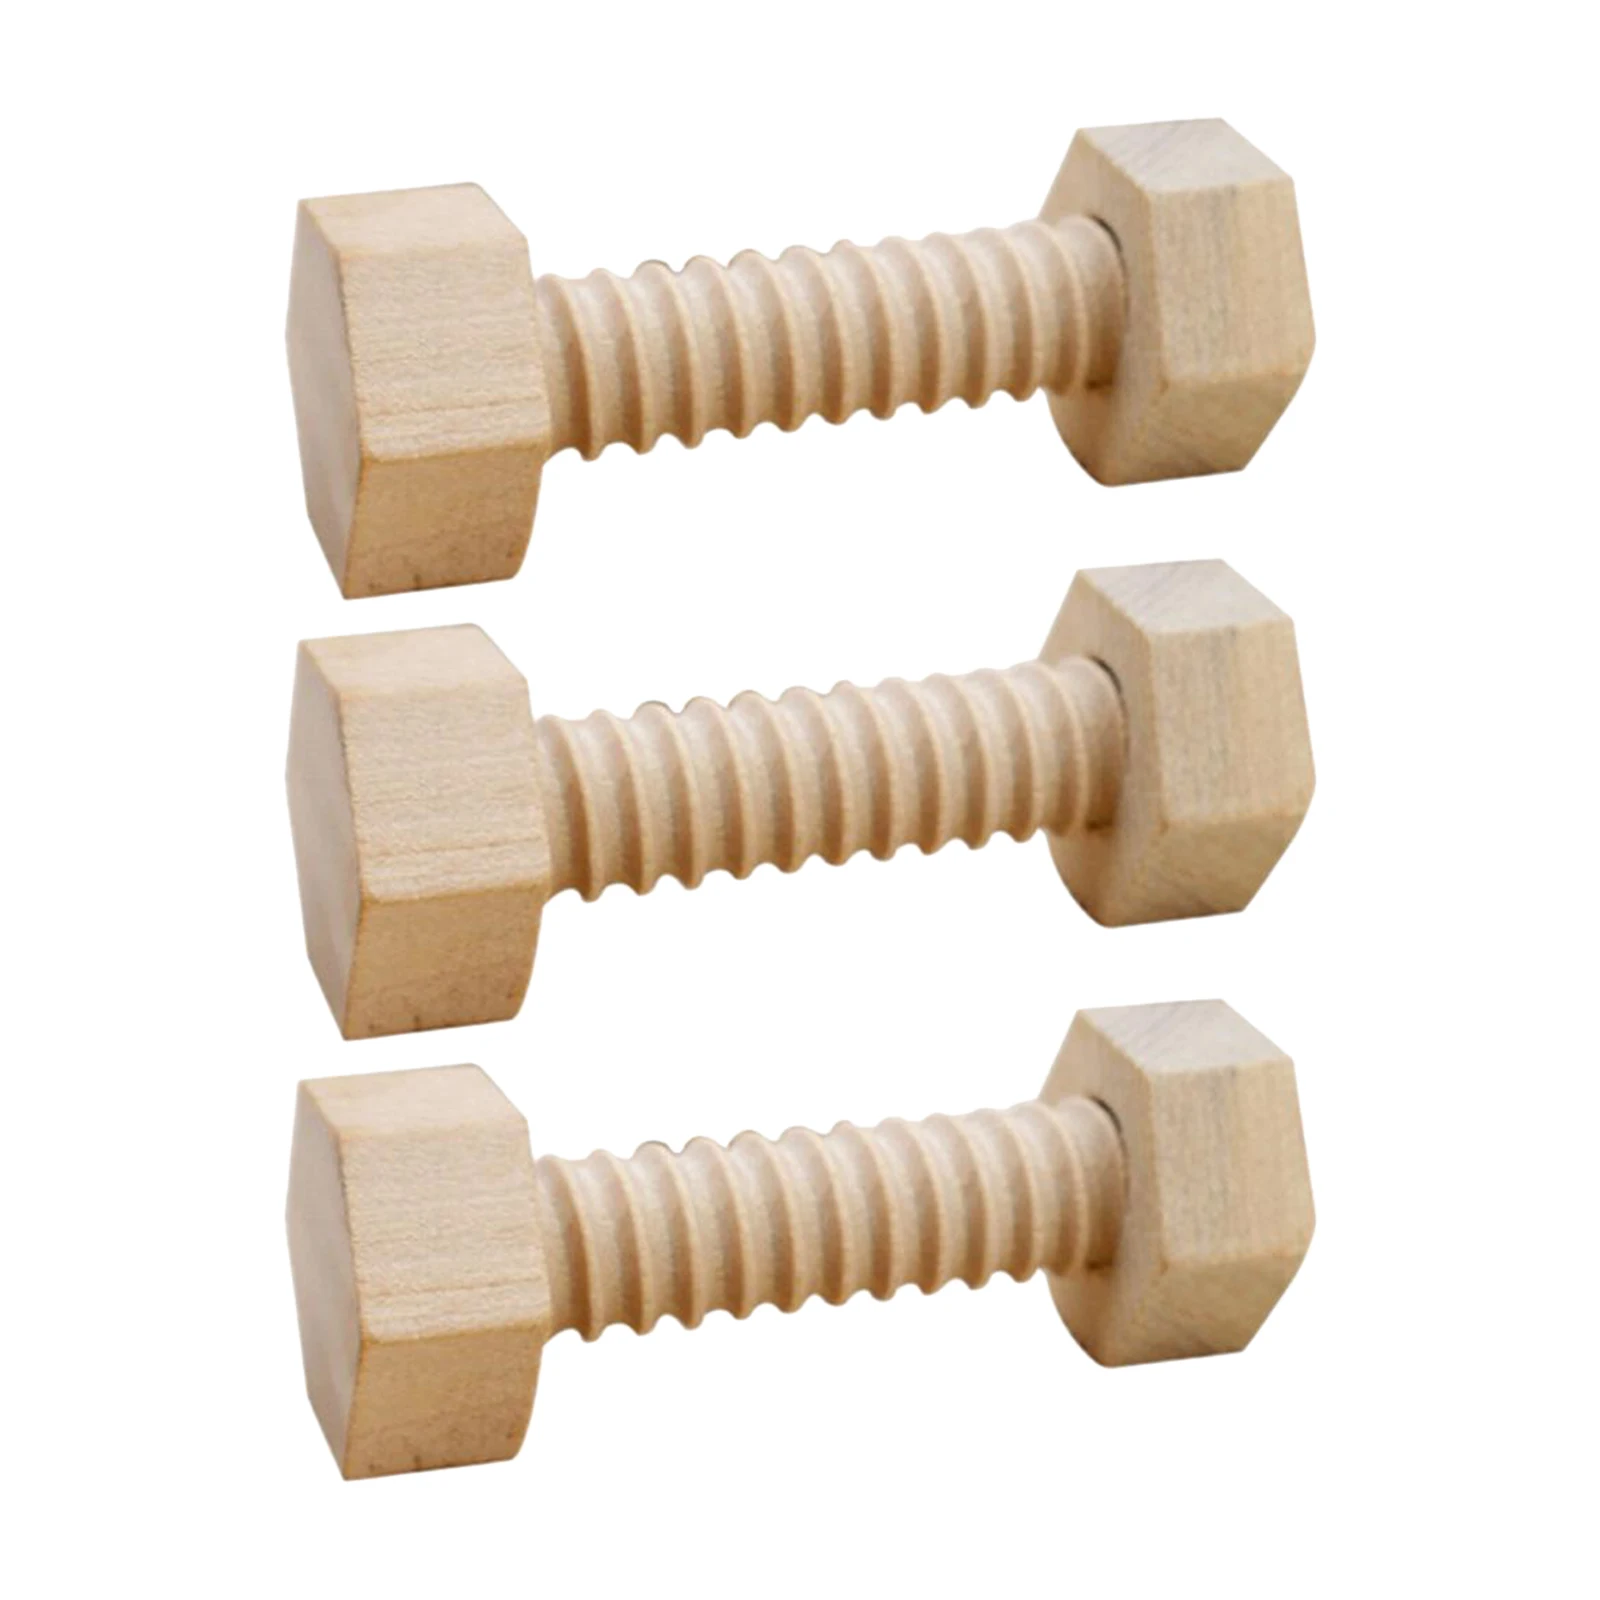 3Pcs Kids Educational Toys Assembling Wooden Toy Wood Screw Nut Hands-on Toy